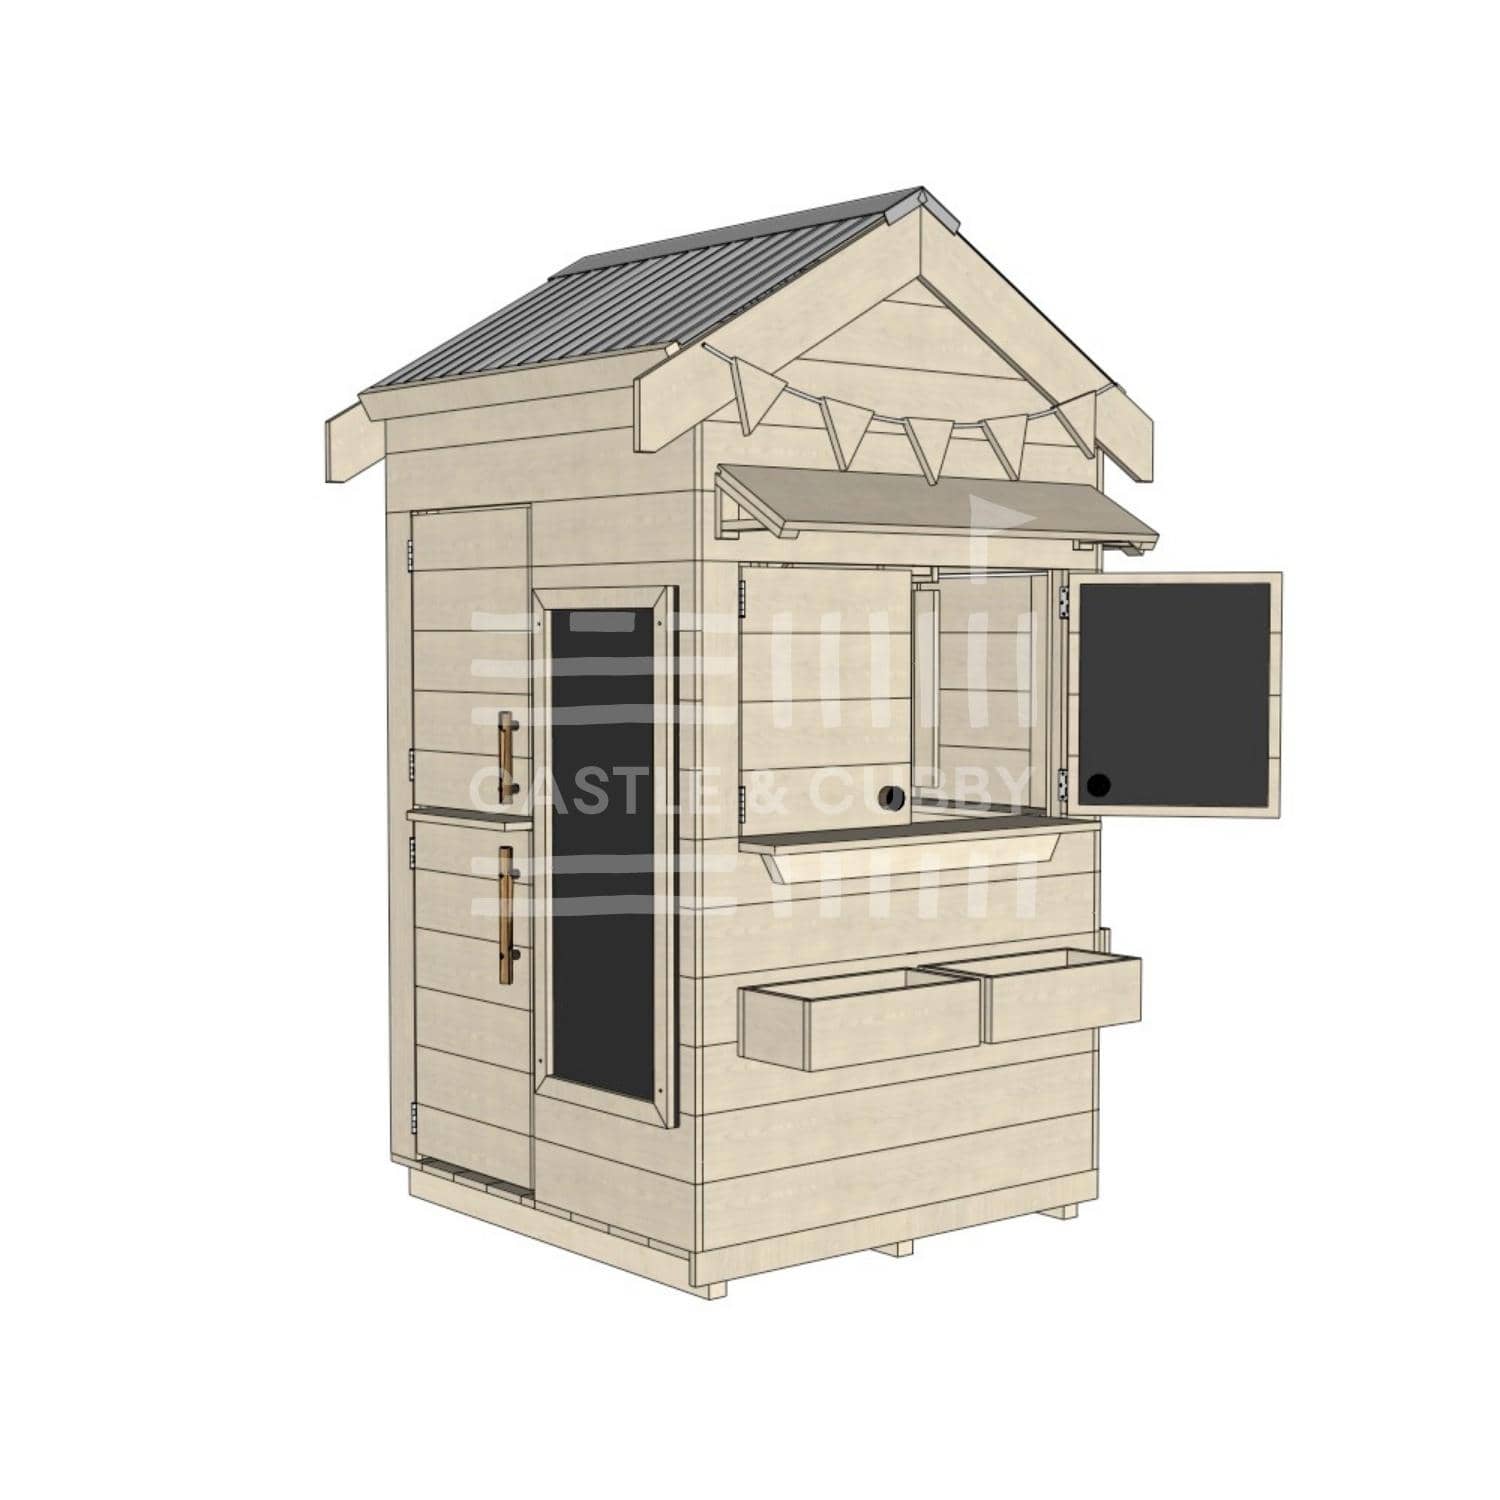 Pitched roof extra height raw wooden cubby house residential and family homes little square accessories